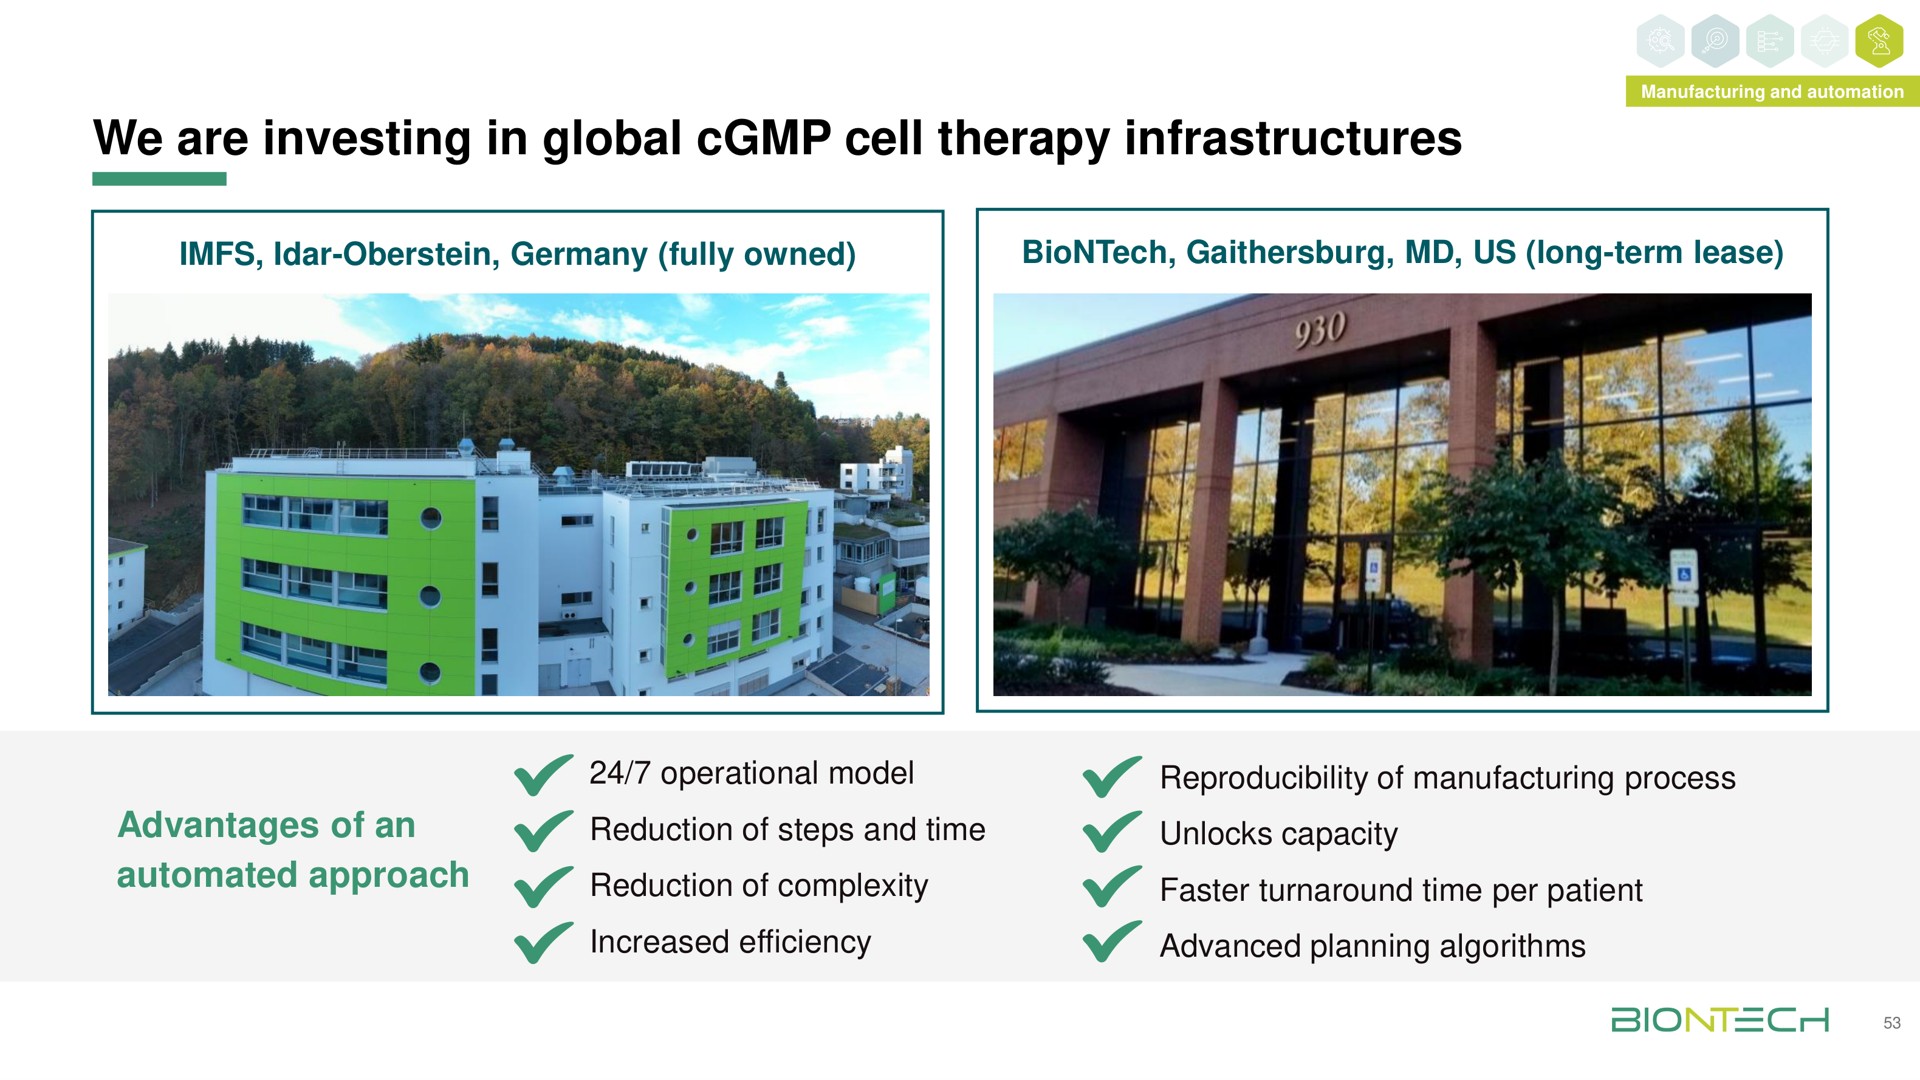 we are investing in global cell therapy infrastructures | BioNTech